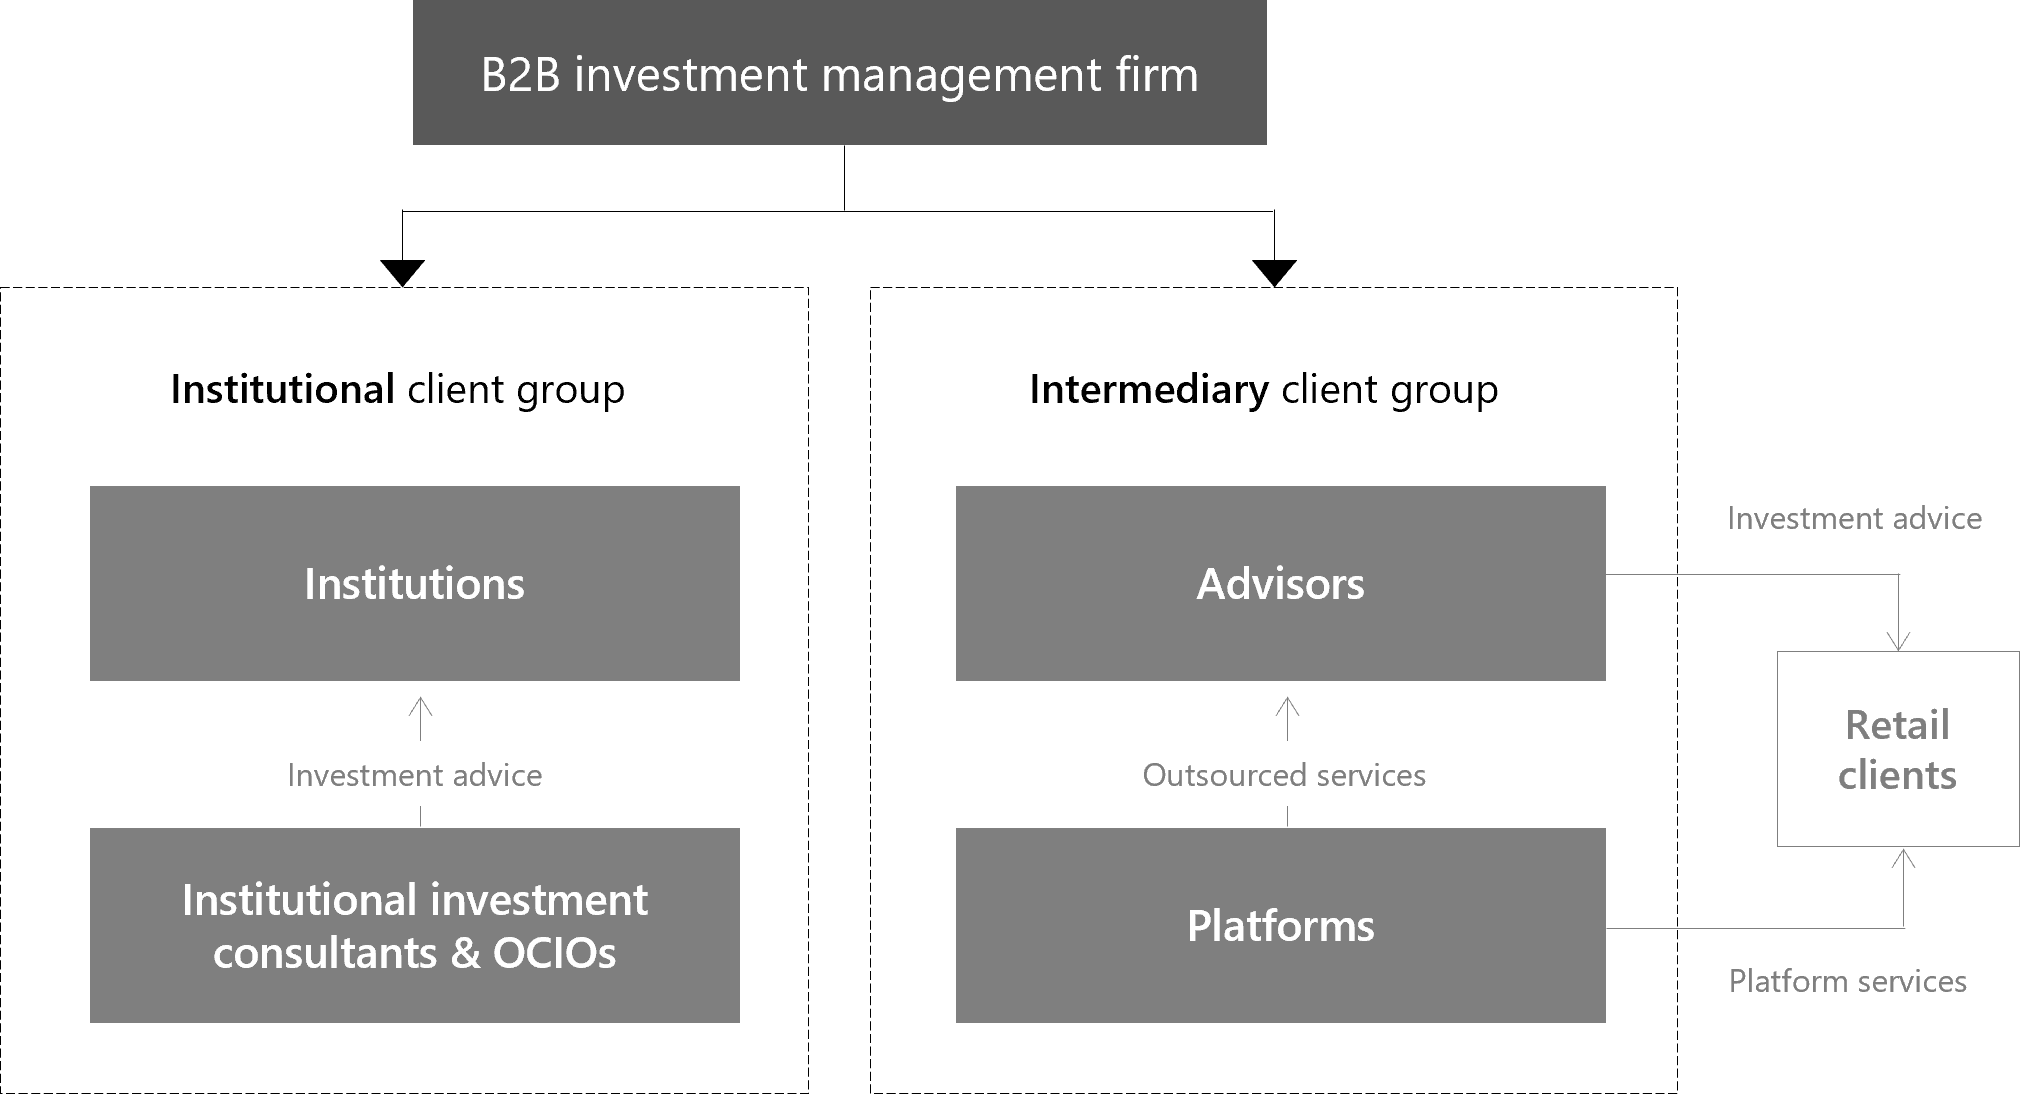 Typical client relationships for B2B investment managers